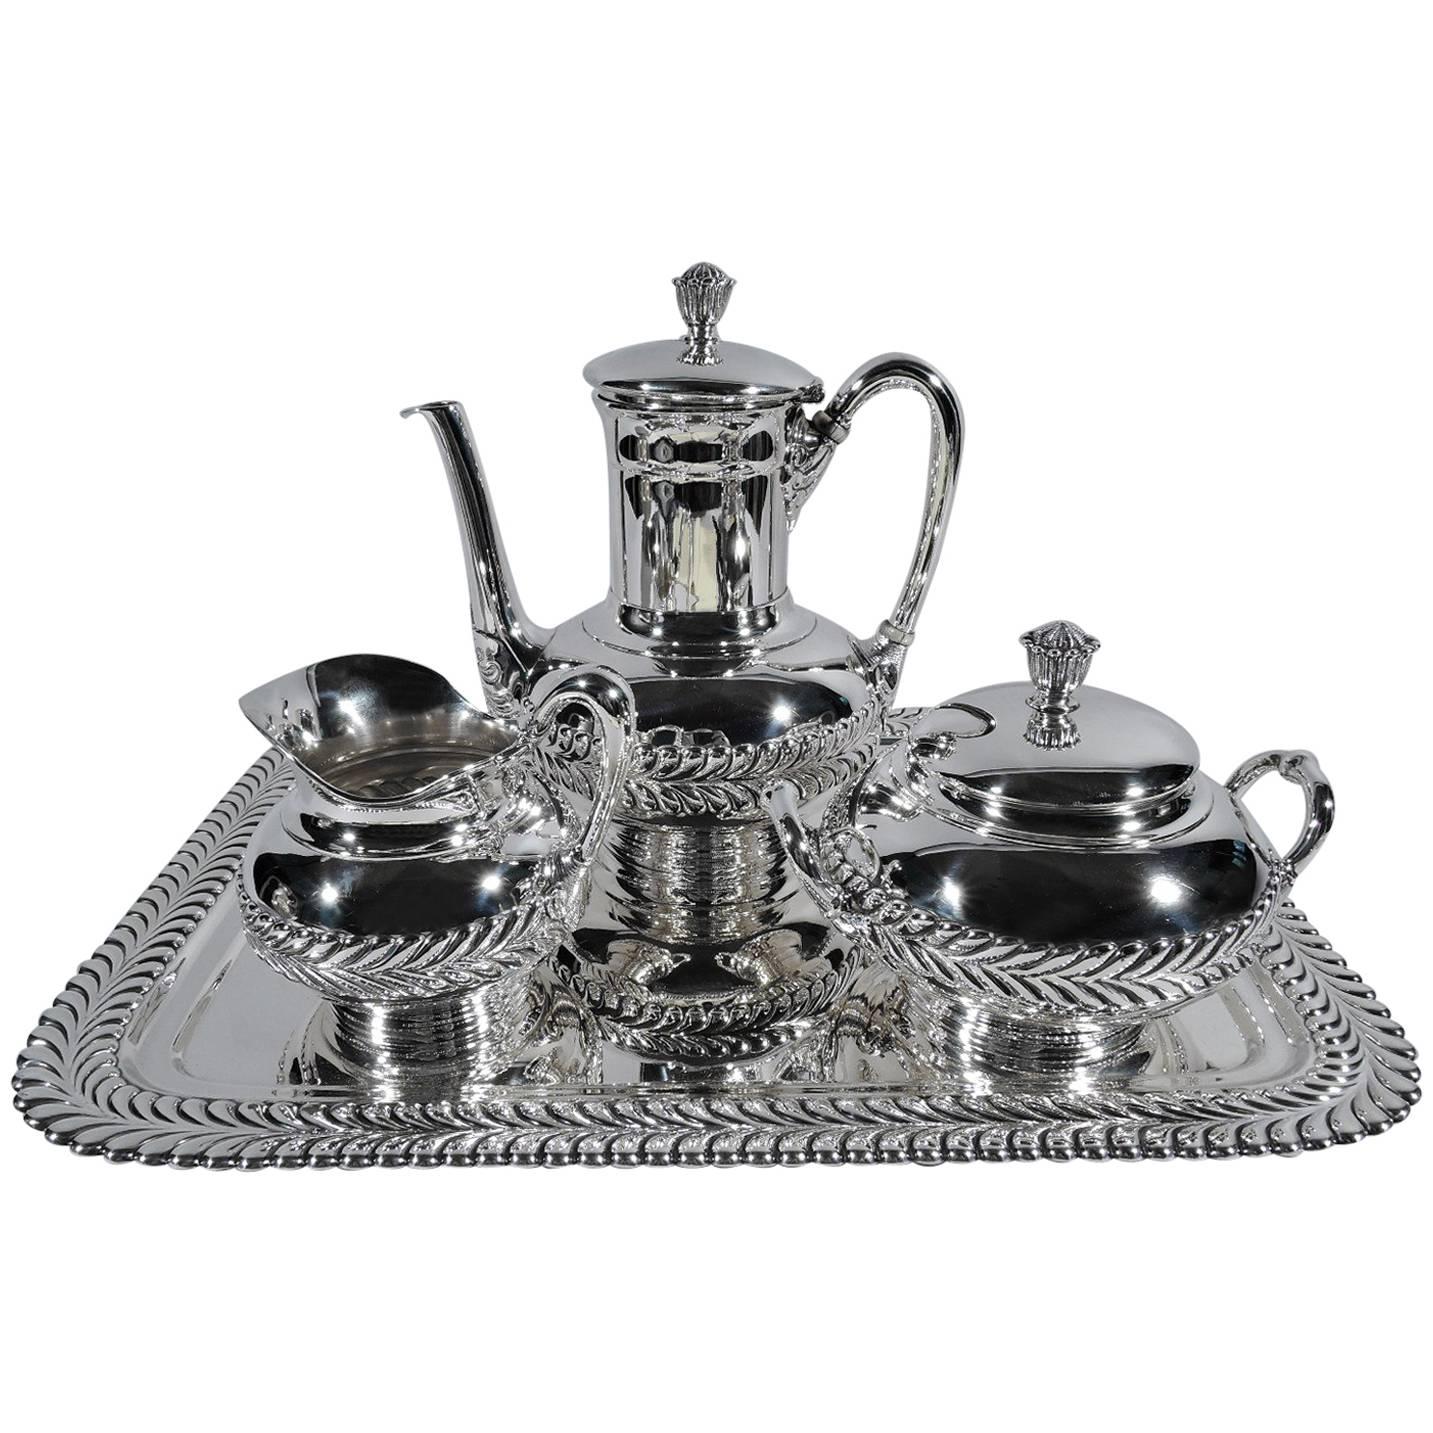 Antique Tiffany Sterling Silver Coffee Set on Tray